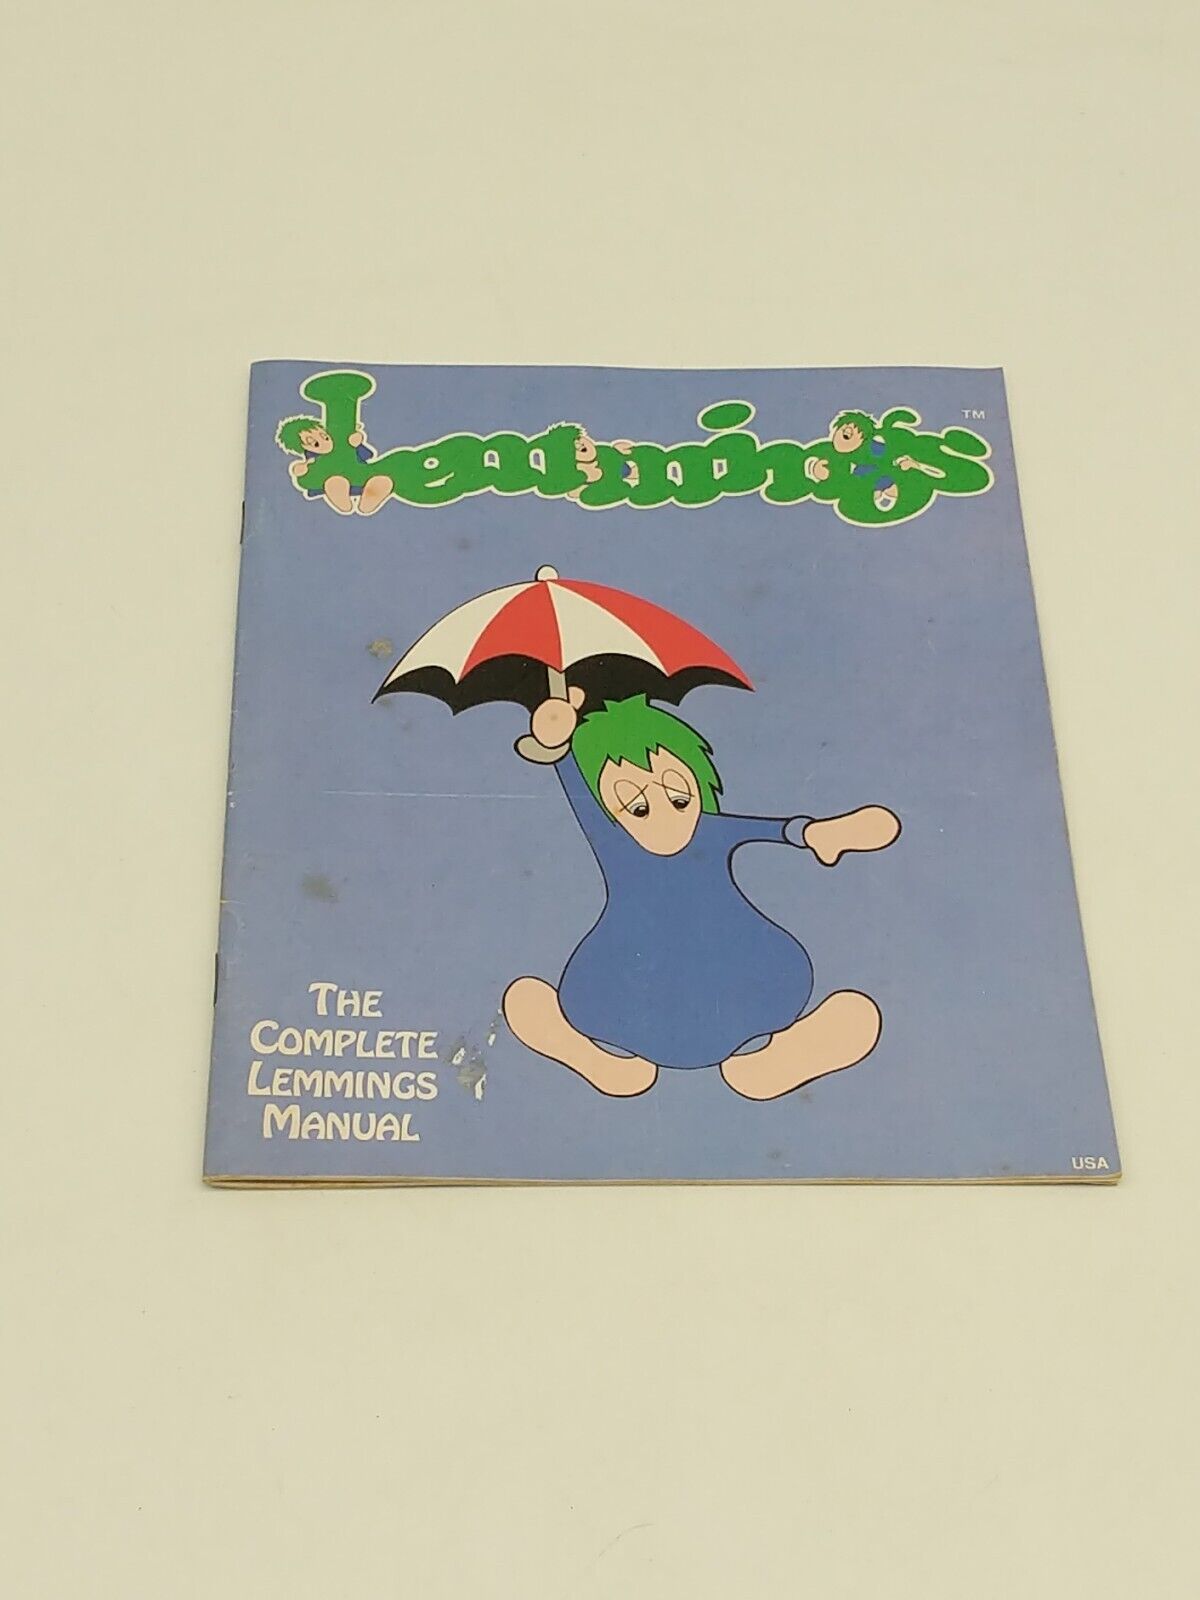 Lemmings - The Complete Lemmings Manual - Psygnosis color vintage game booklet